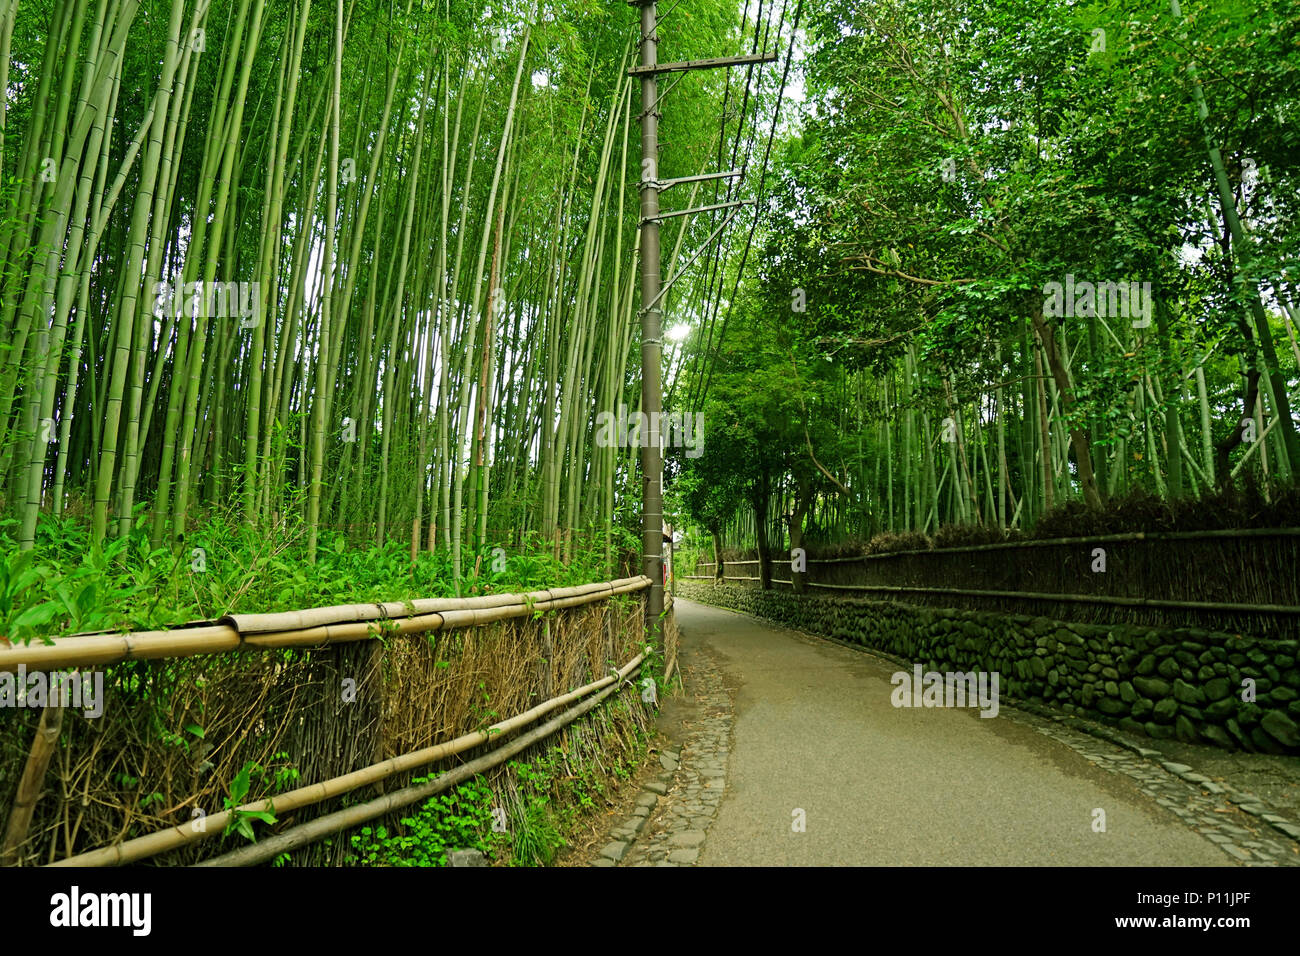 The green bamboo plant forest and footpath in Japan zen garden Stock Photo